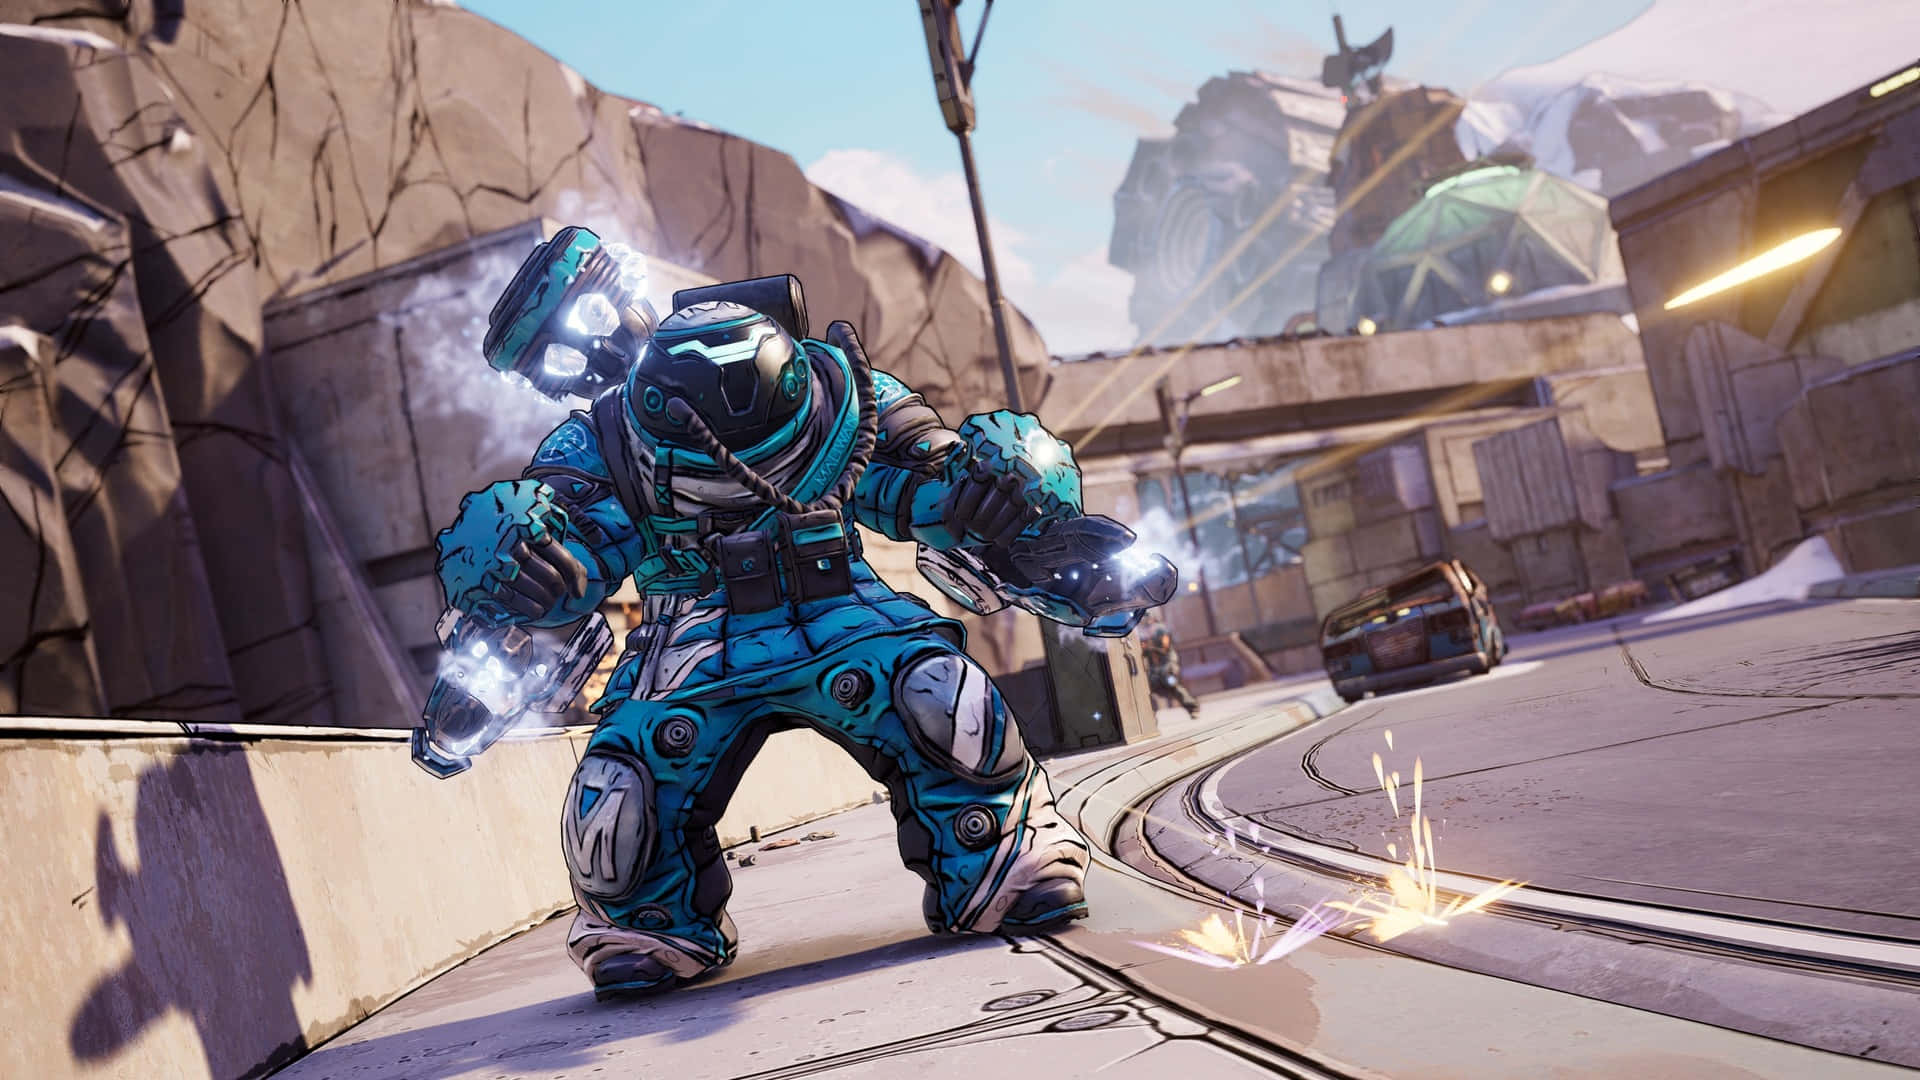 Get The Best Out Of Borderlands 3, the Stunning Video Game